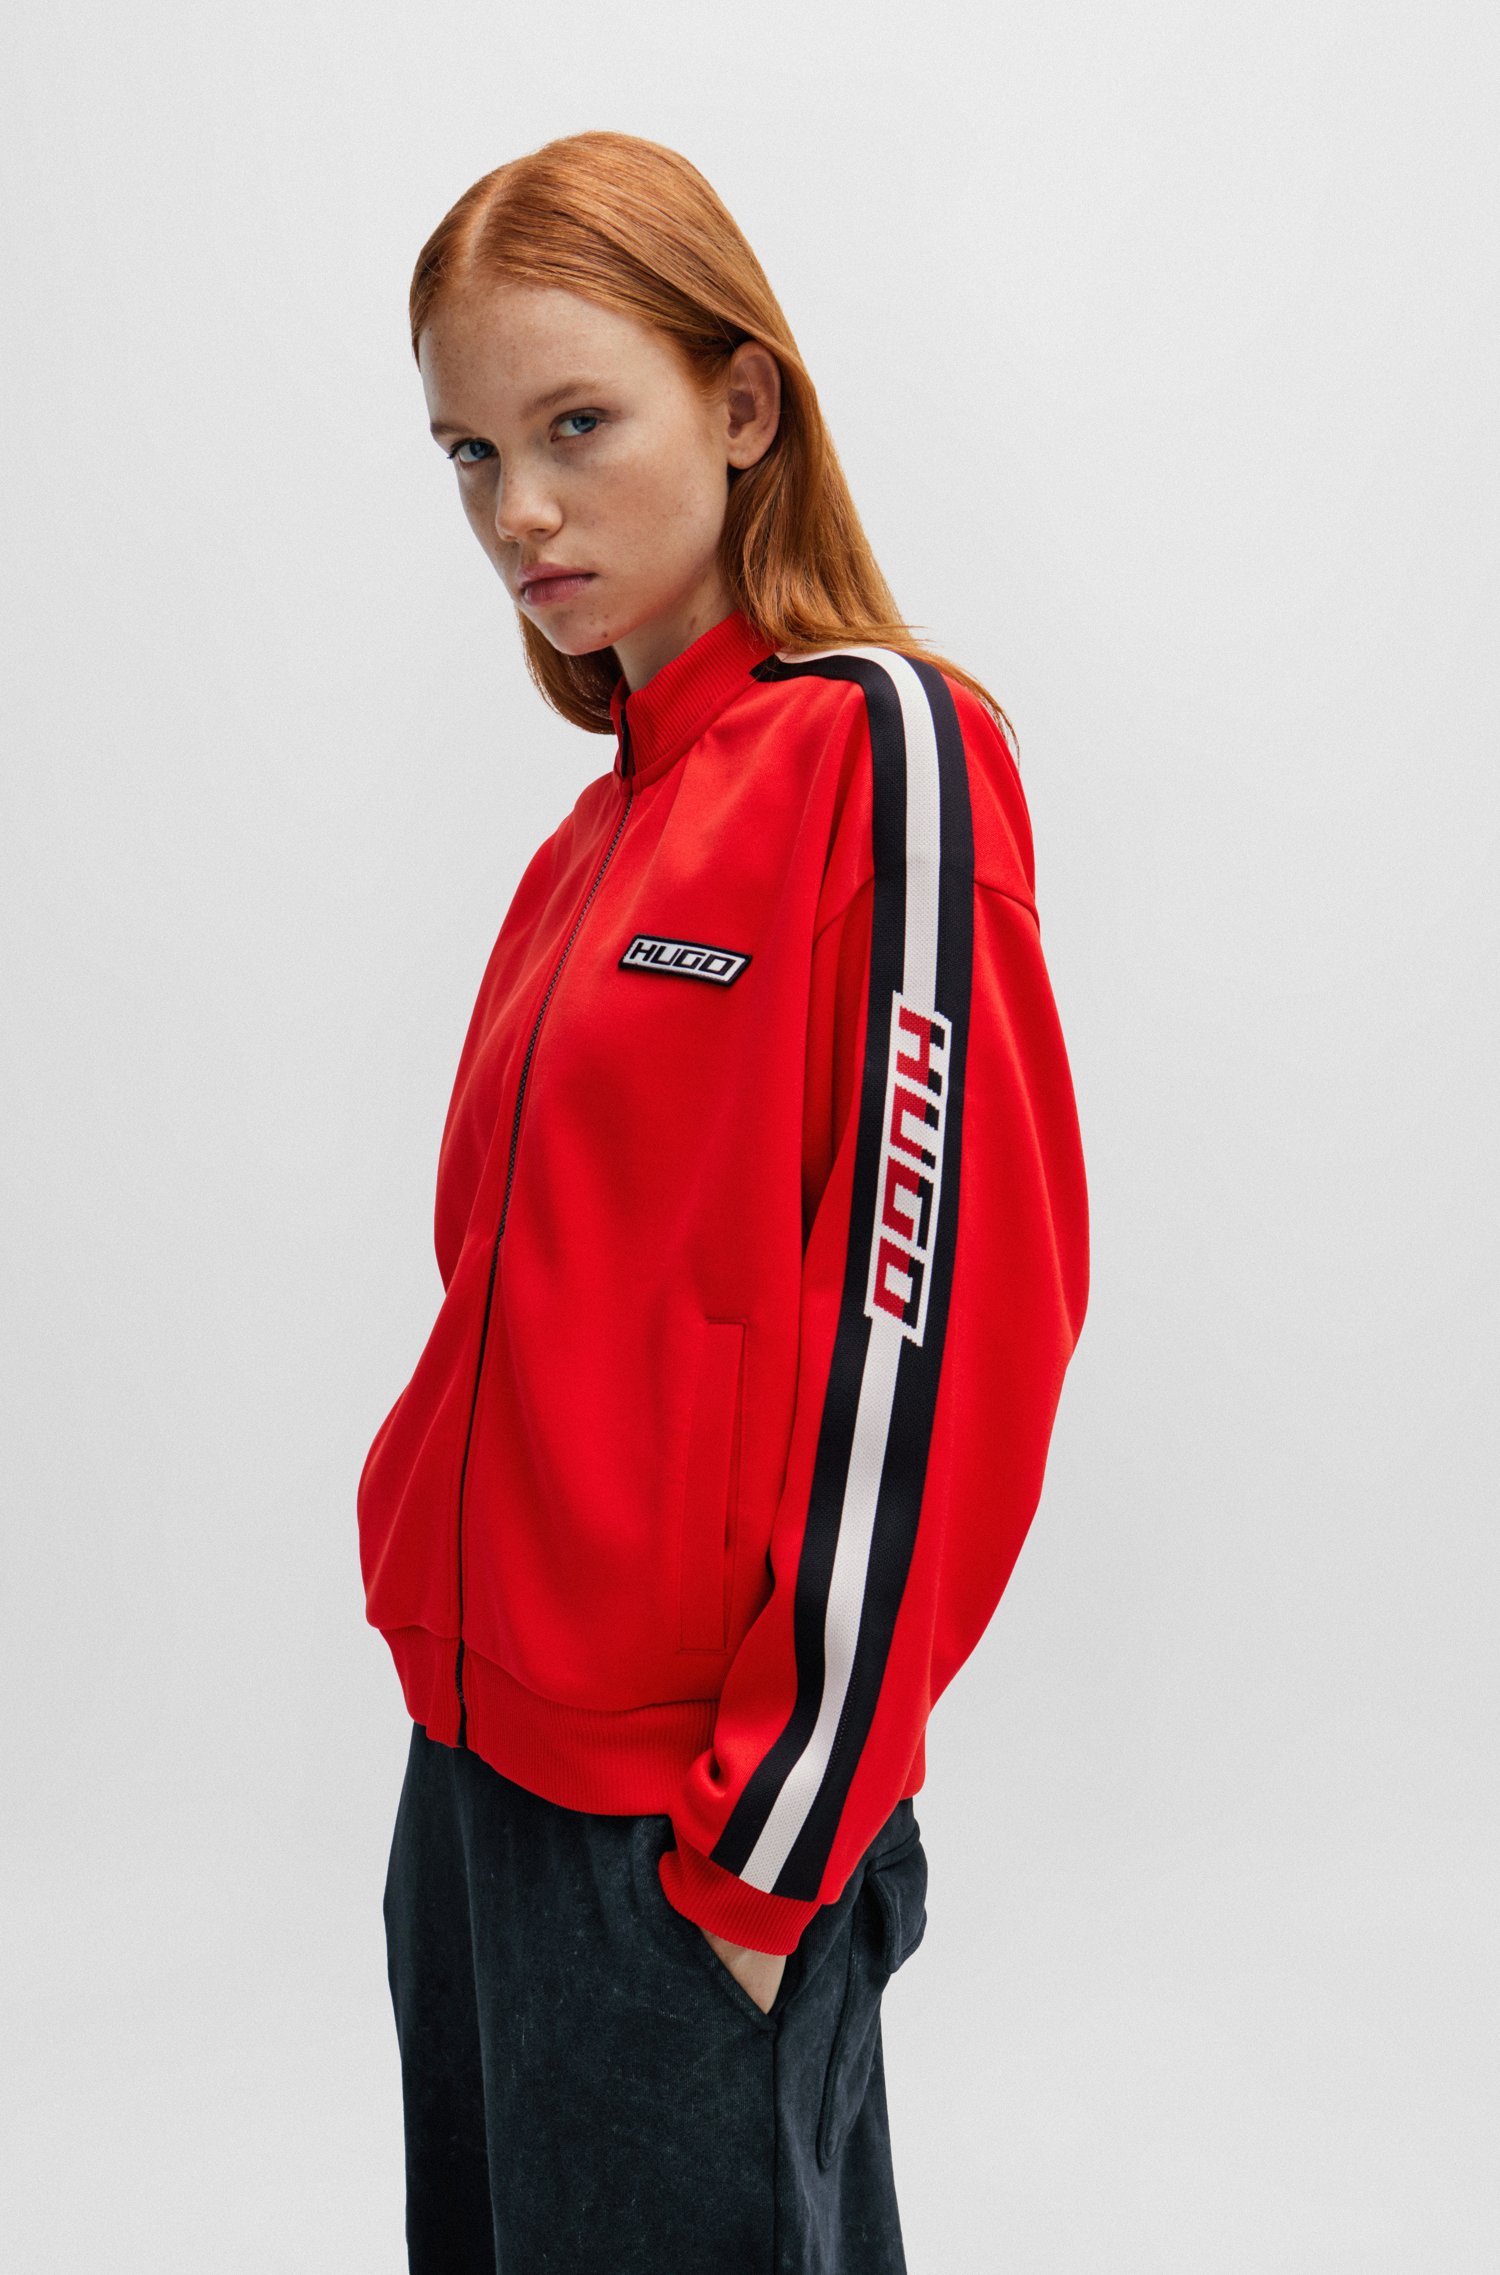 Racing-inspired jacket with striped logo tape